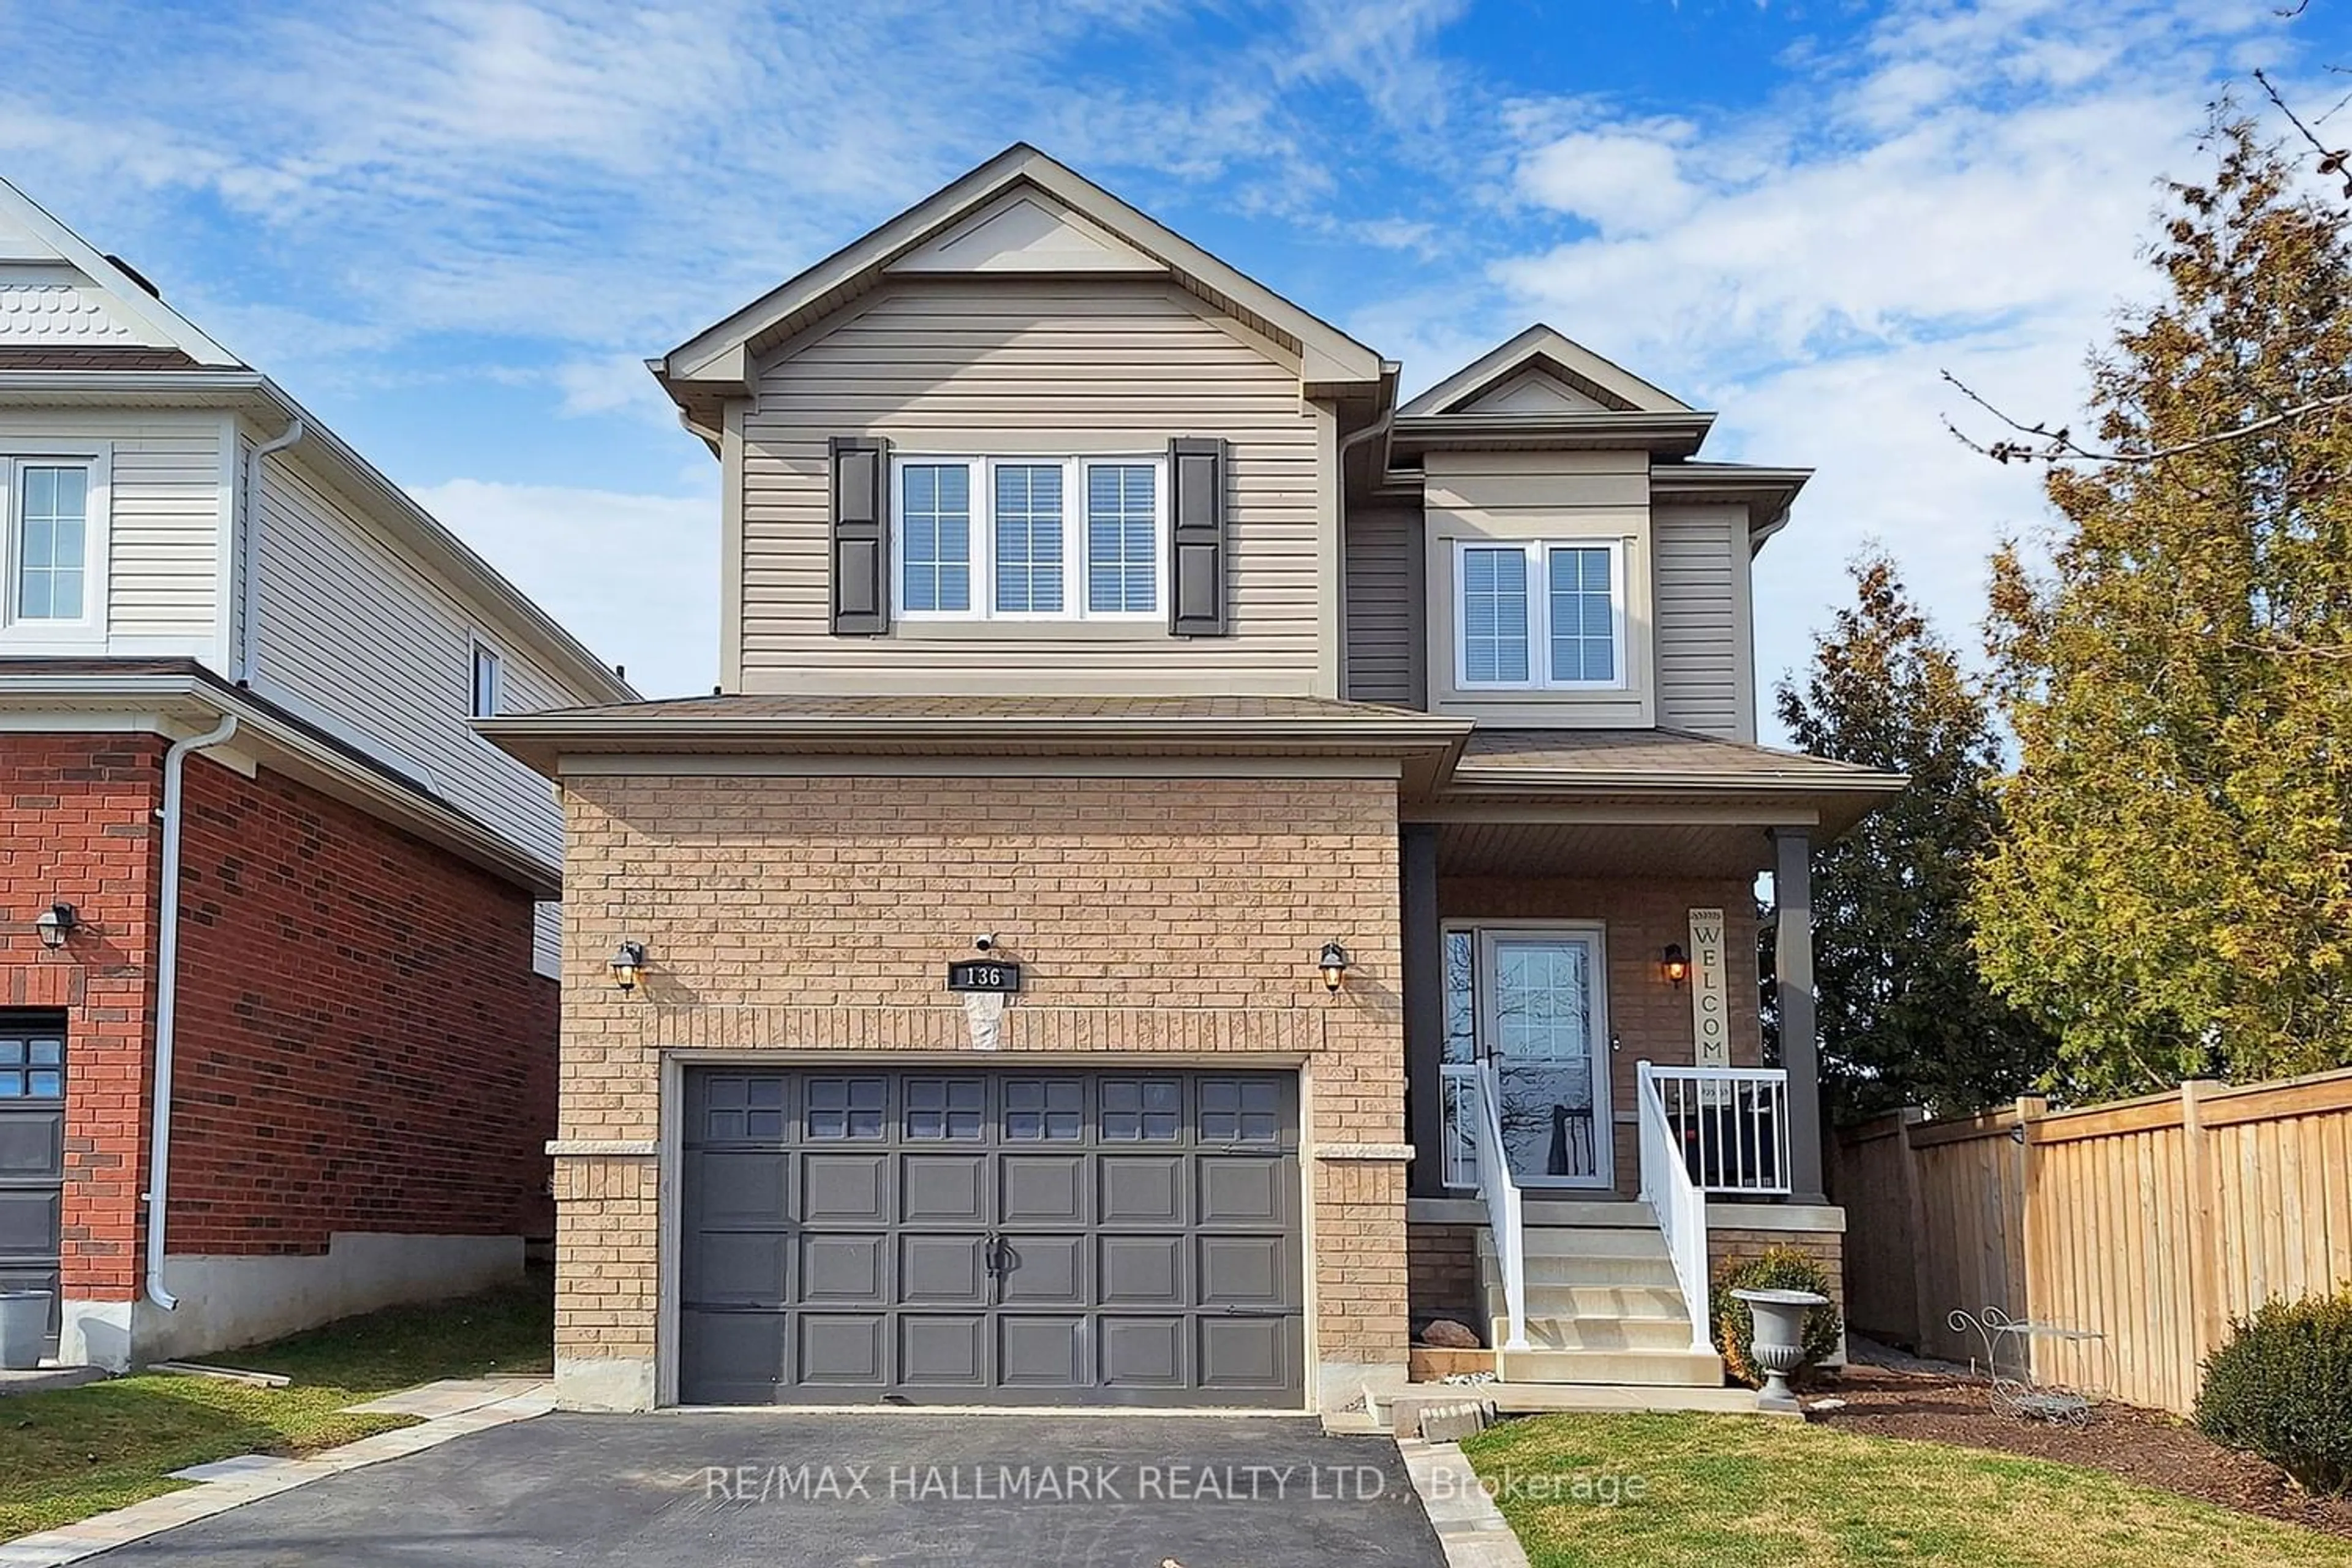 Home with brick exterior material for 136 Redfern Cres, Clarington Ontario L1C 0K1